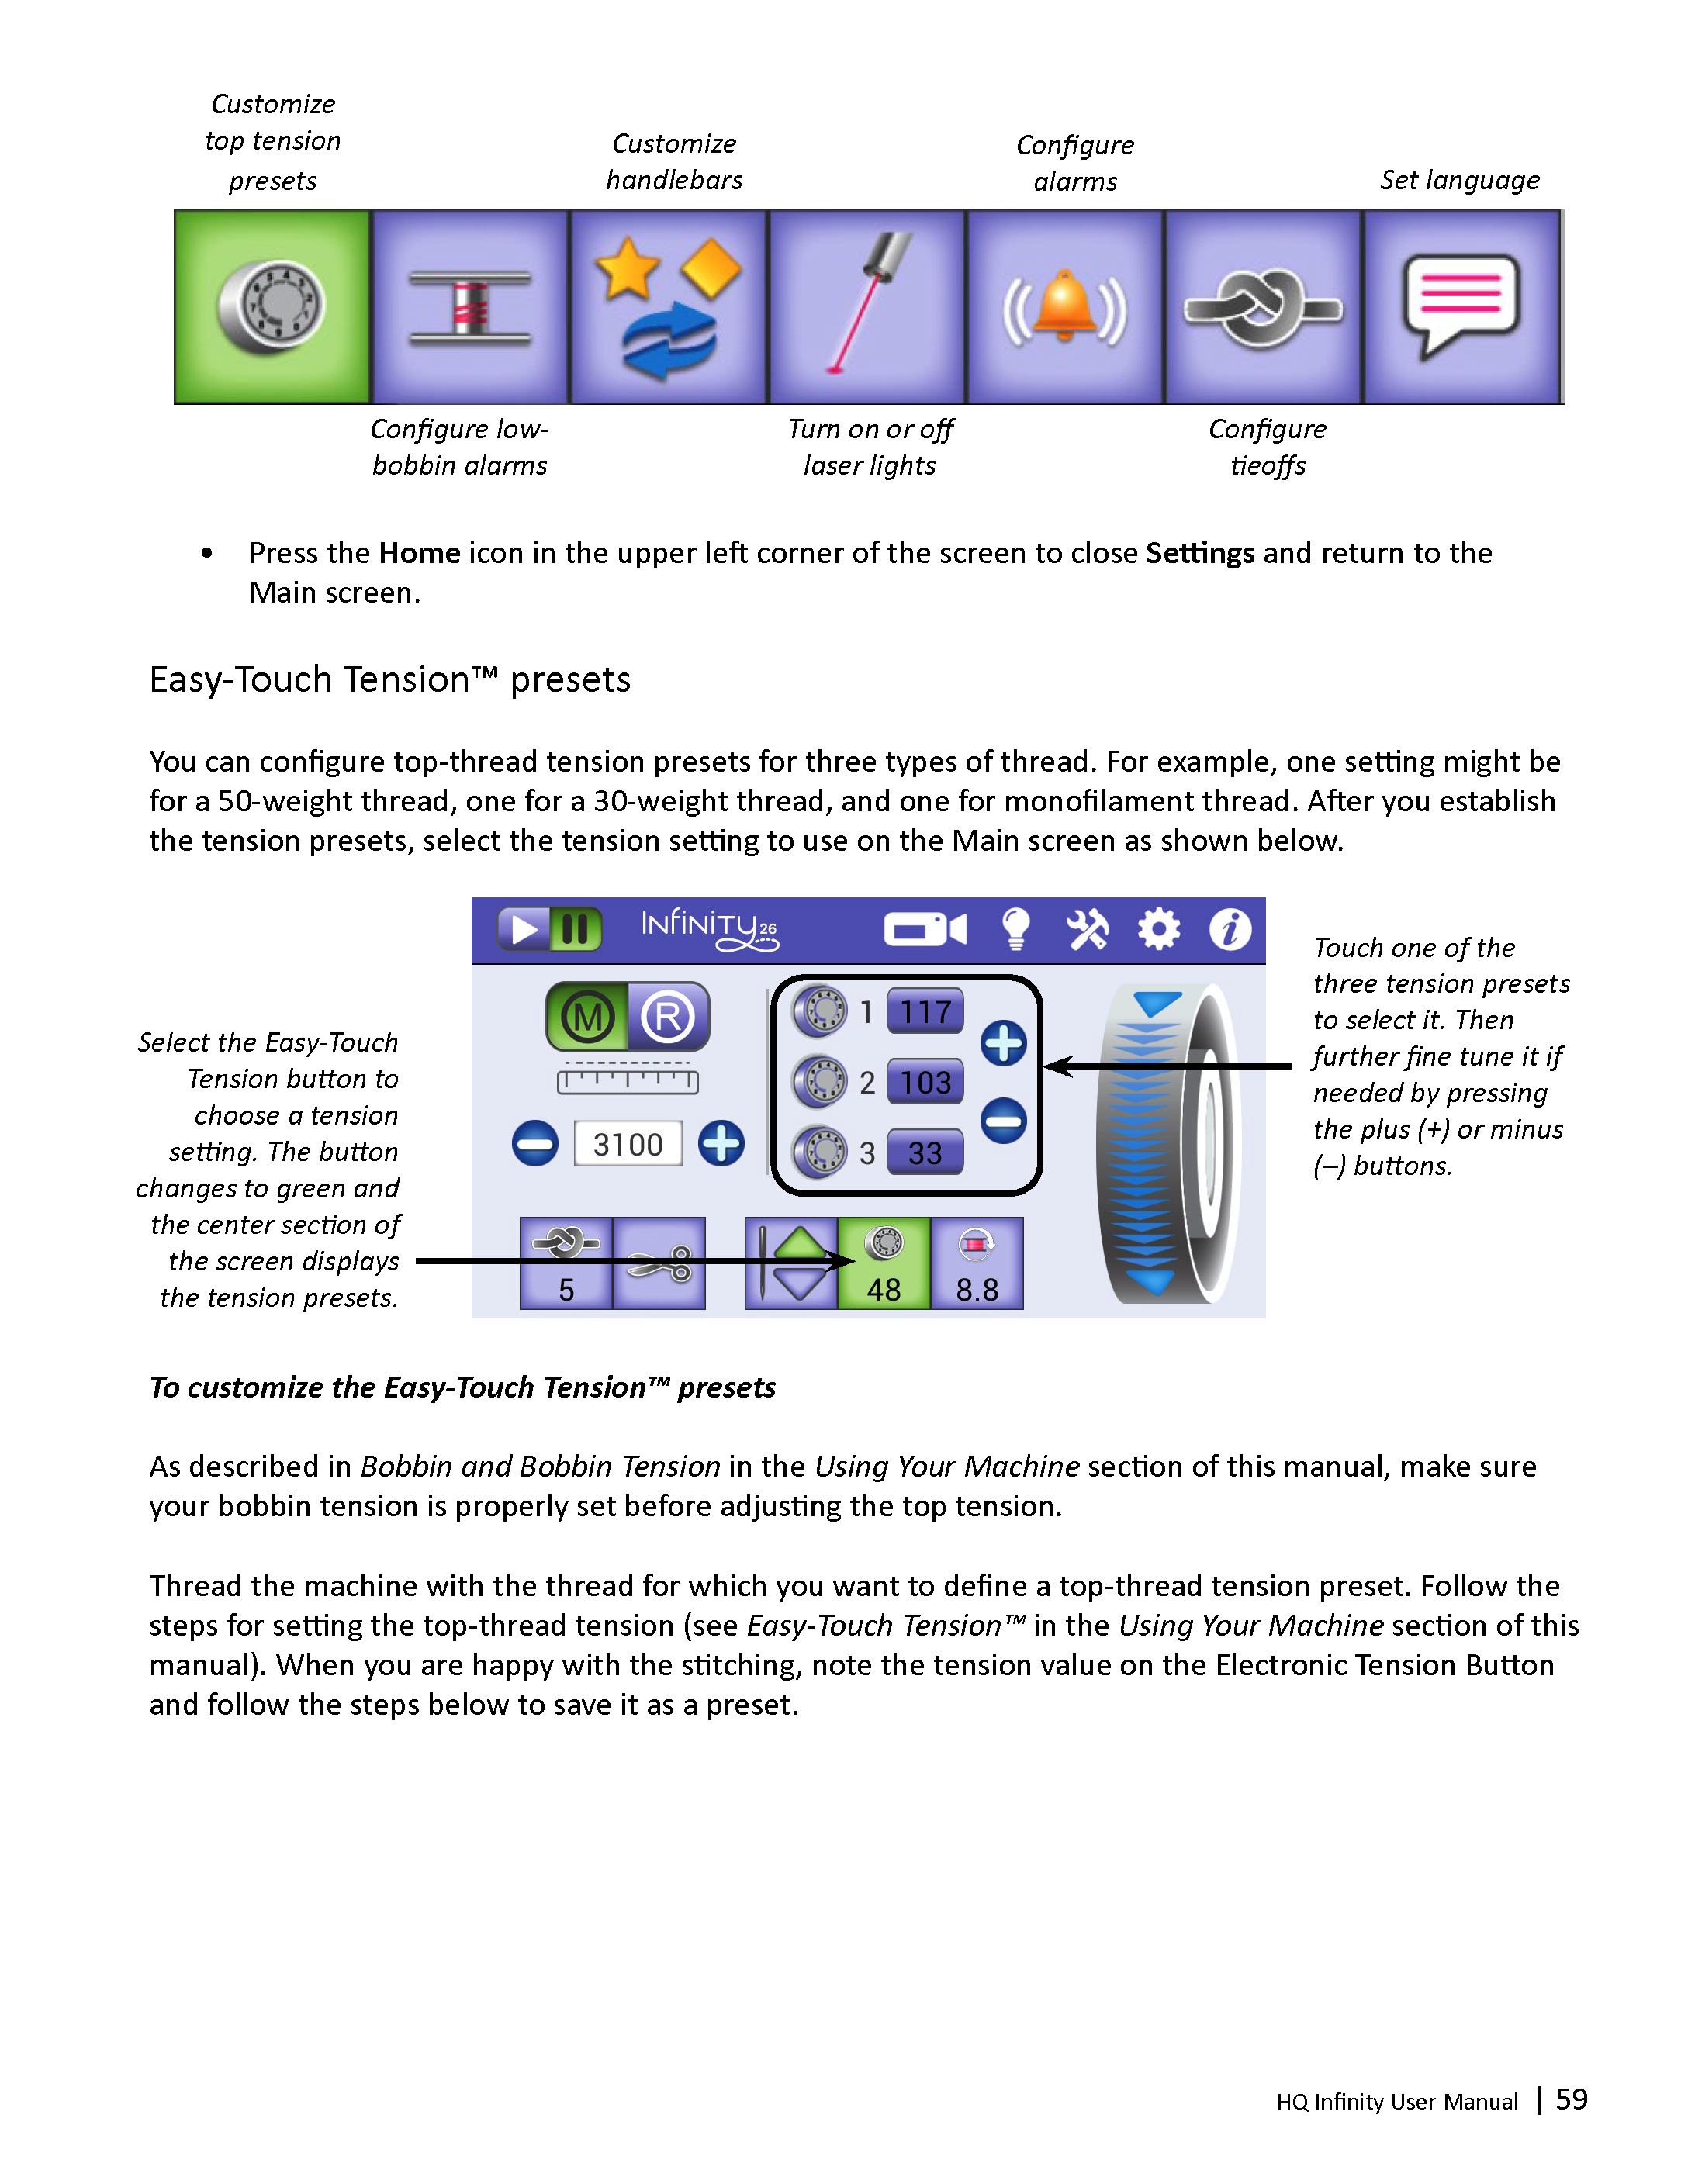 QM33001-HQ-Infinity-User-manual-version-1.4-ALL-Web-1_Page_60.png